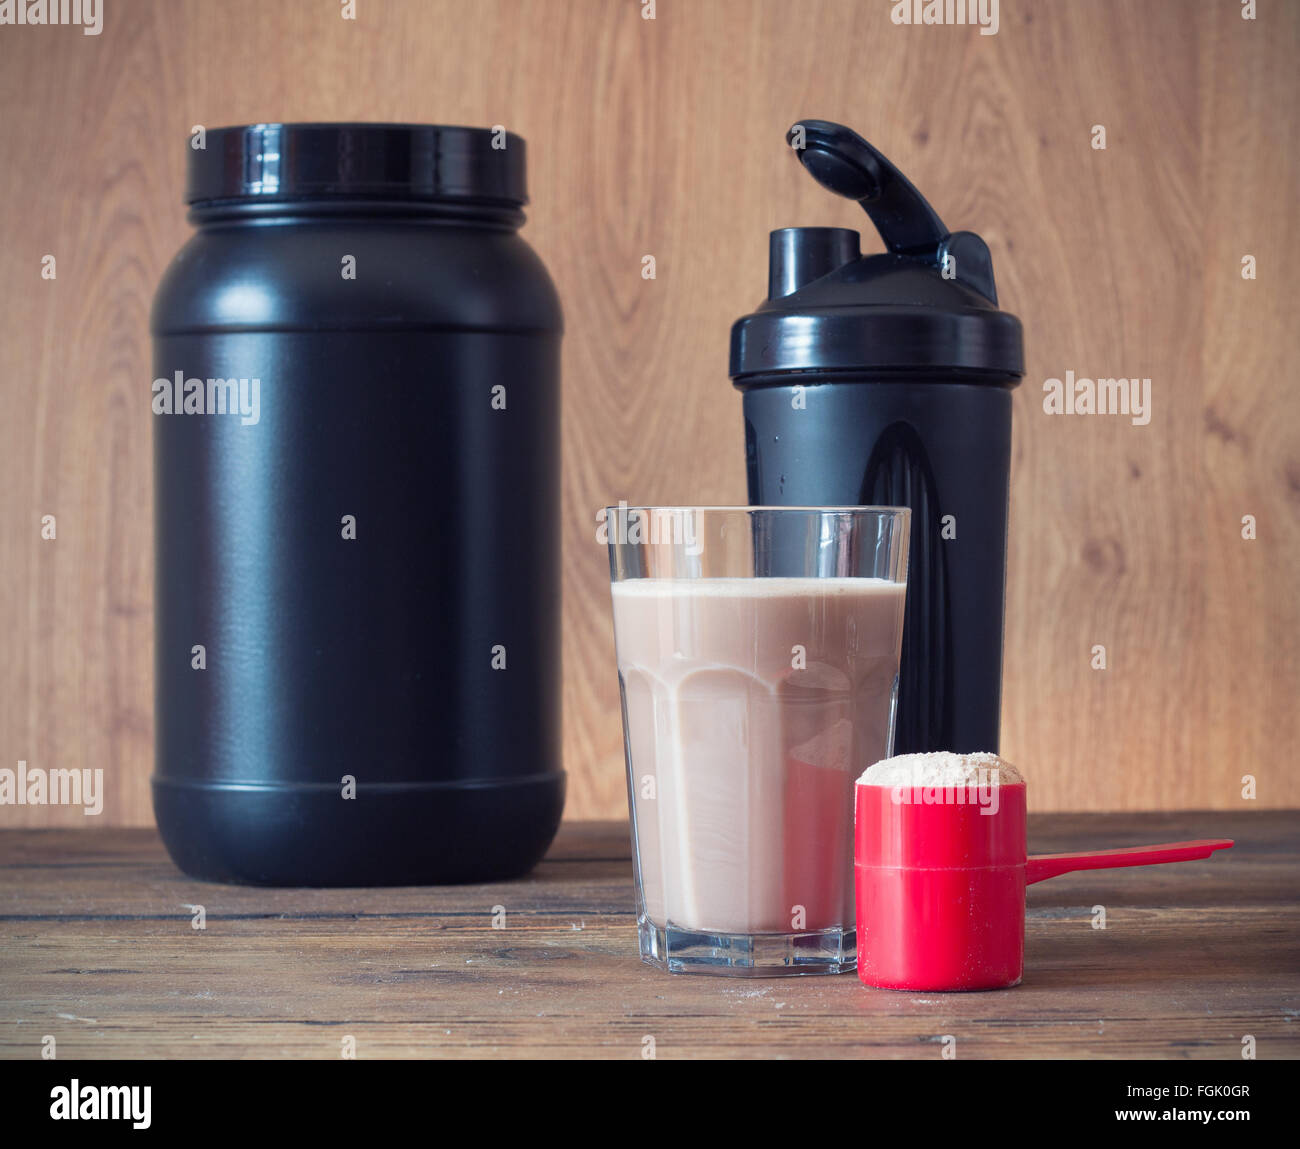 Whey Protein Powder In Scoop With Vitamins And Plastic Shaker On Wooden Background Stock Photo